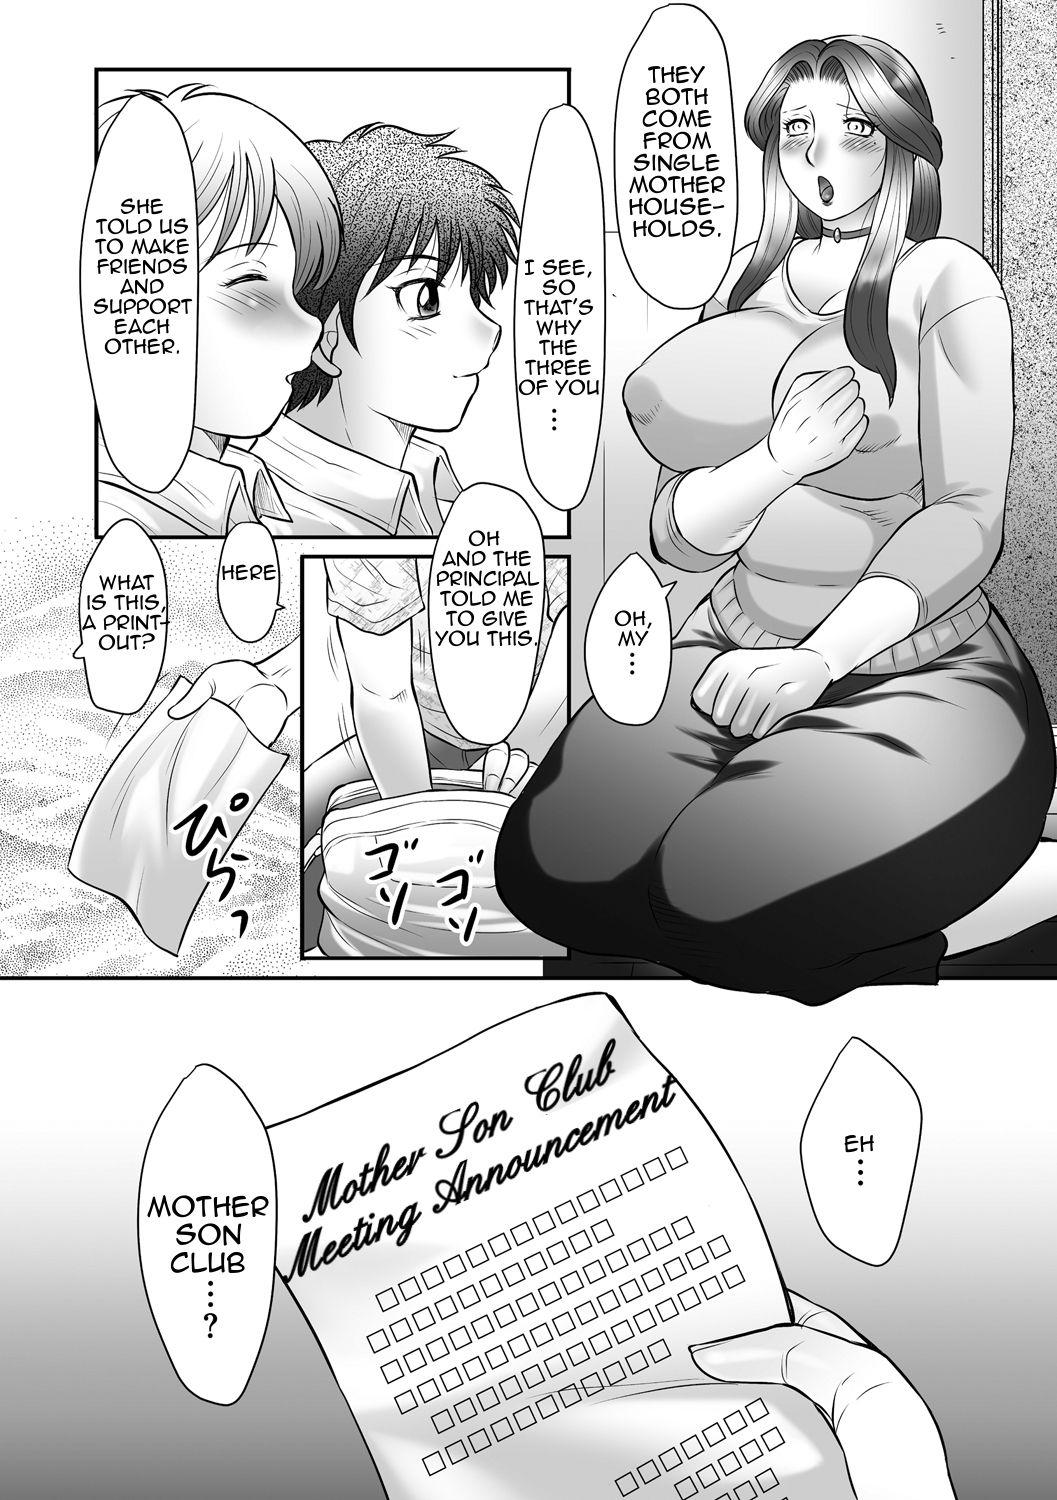 Boshi no Susume - The advice of the mother and child Ch. 1 19